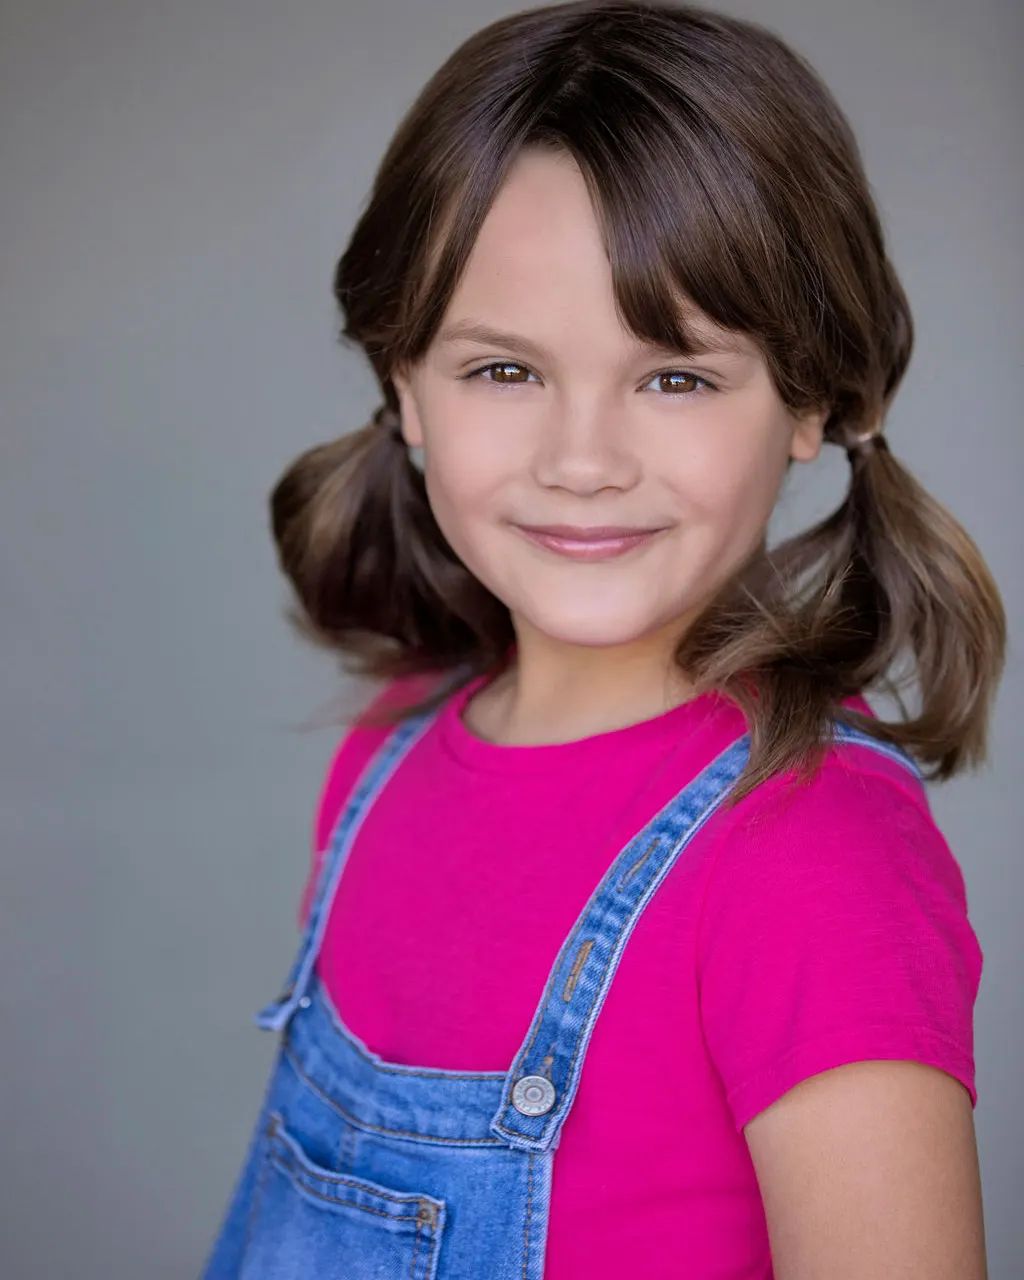 Meet Elin Alexander, the Actress Who Plays Holly on Days of Our Lives